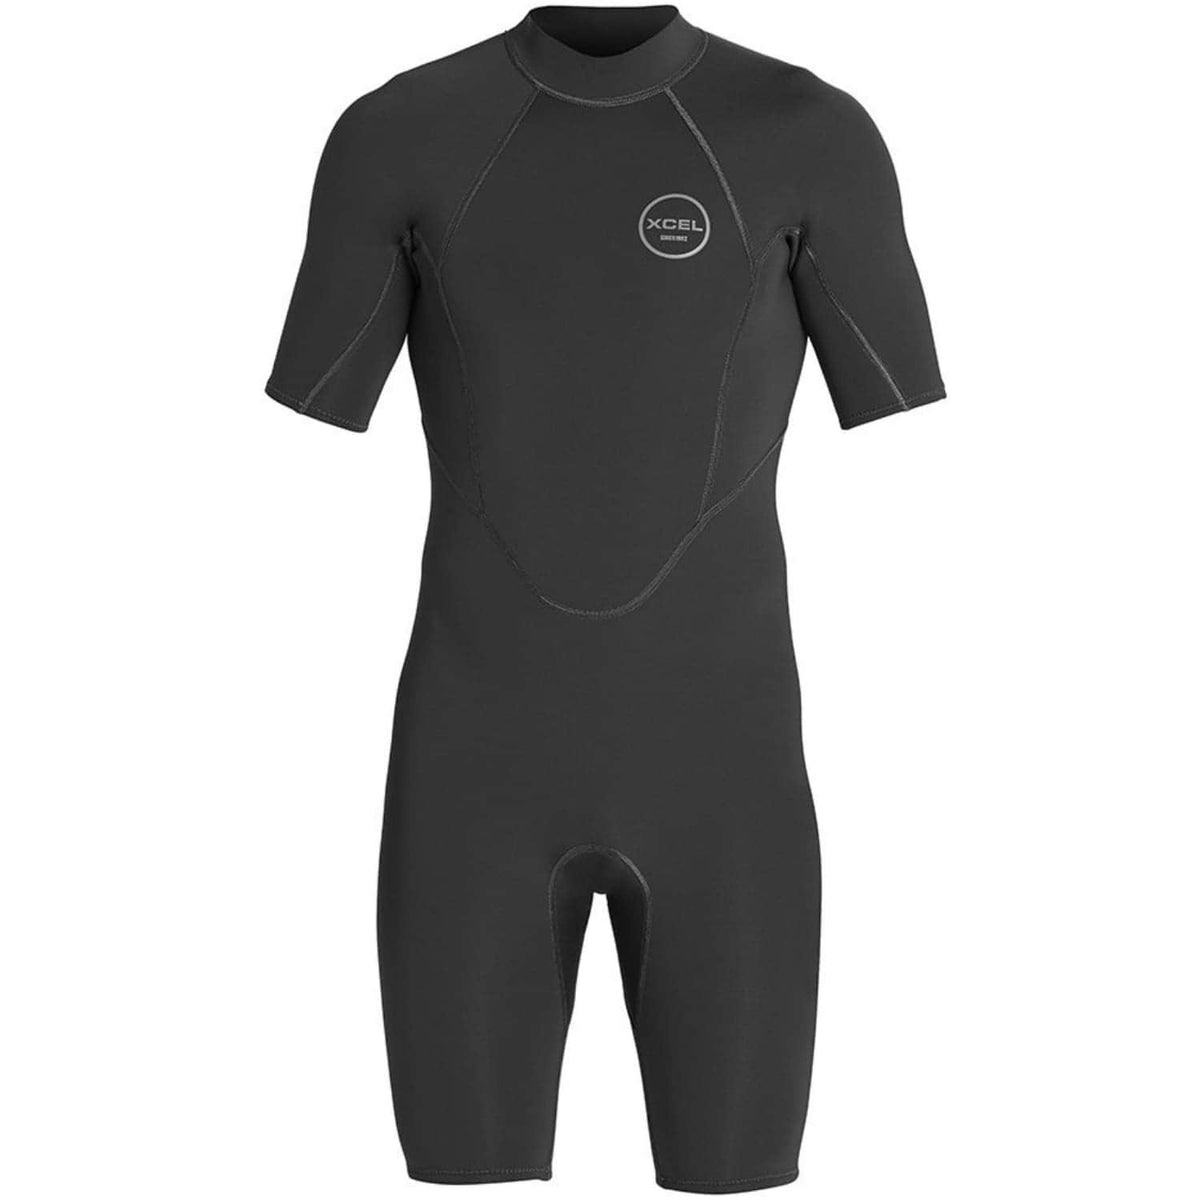 Xcel Mens 2mm Axis Spring Shorty Wetsuit - Black